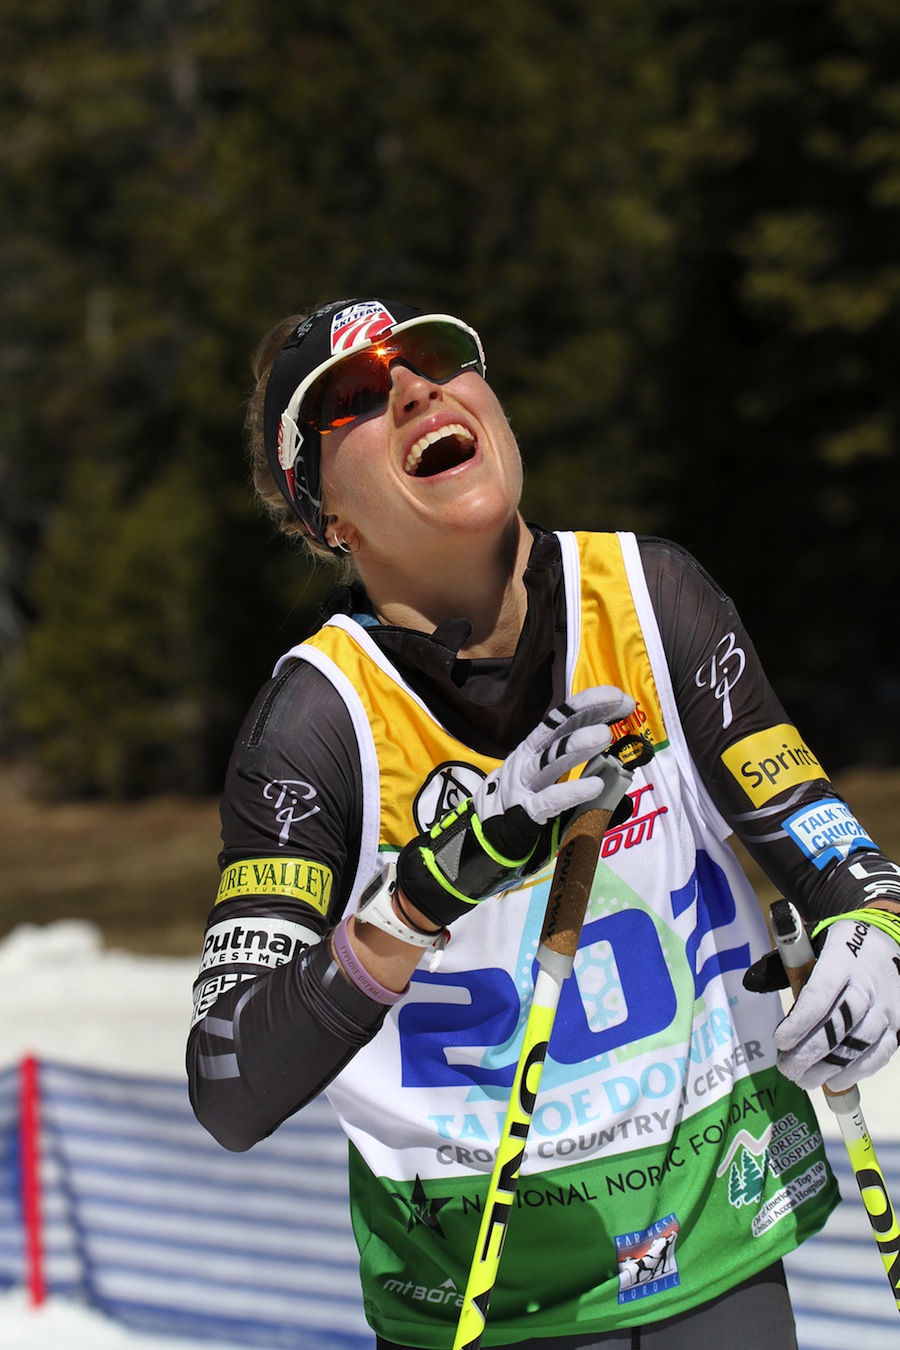 Liz Stephen celebrates her second major win of the week at Spring Series in California, winning Wednesday's 30 k classic mass start at U.S. Distance Nationals at Royal Gorge. Two days early, she claimed the SuperTour Finals title. (Photo: Mark Nadell/MacBeth Graphics)